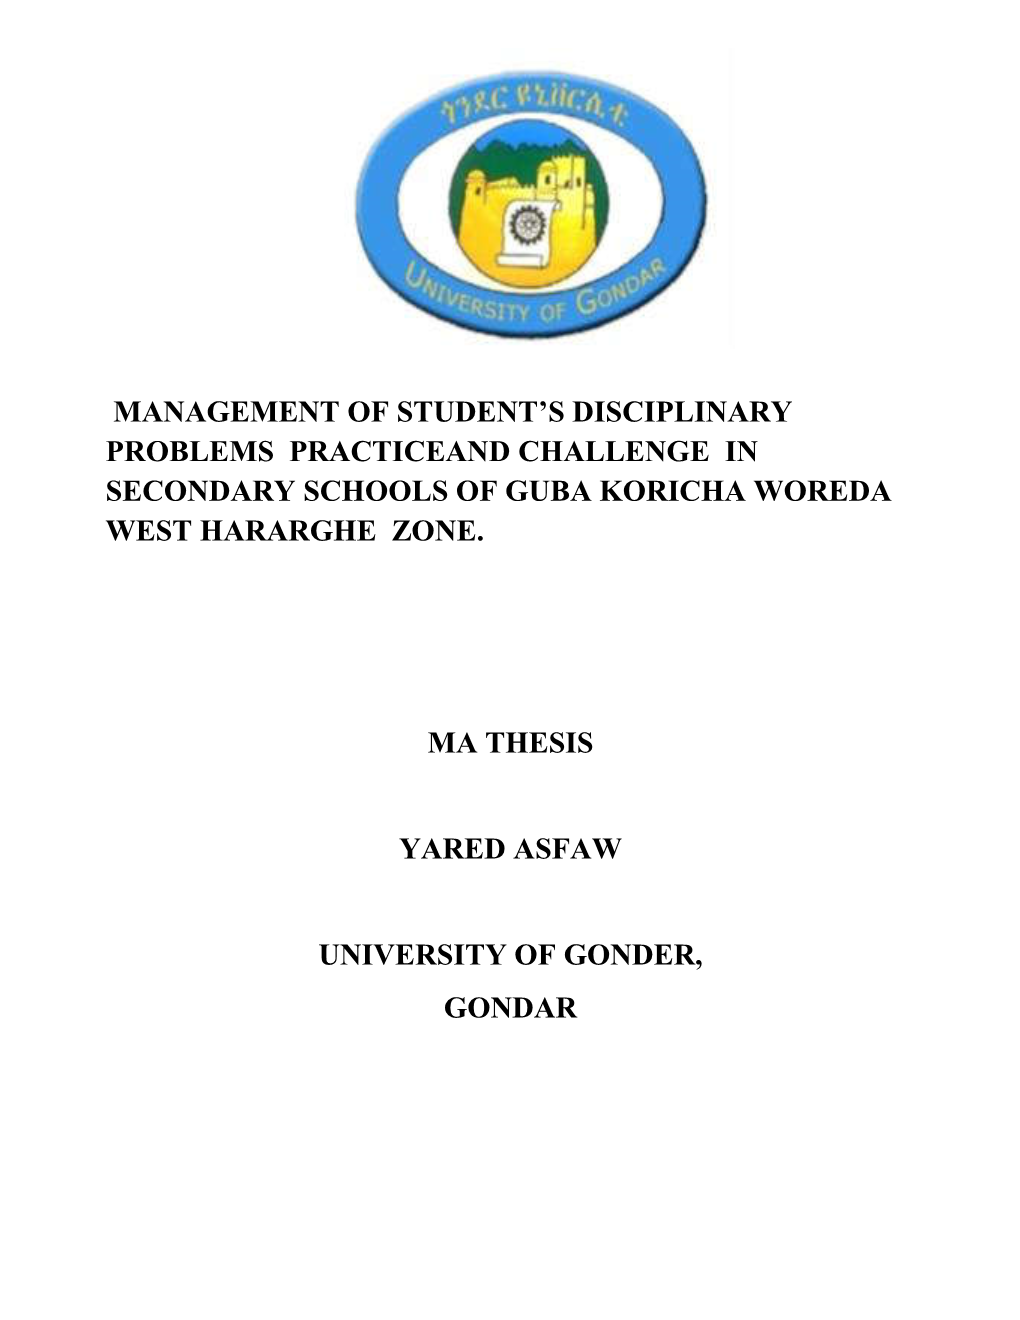 Management of Student's Disciplinary Problems